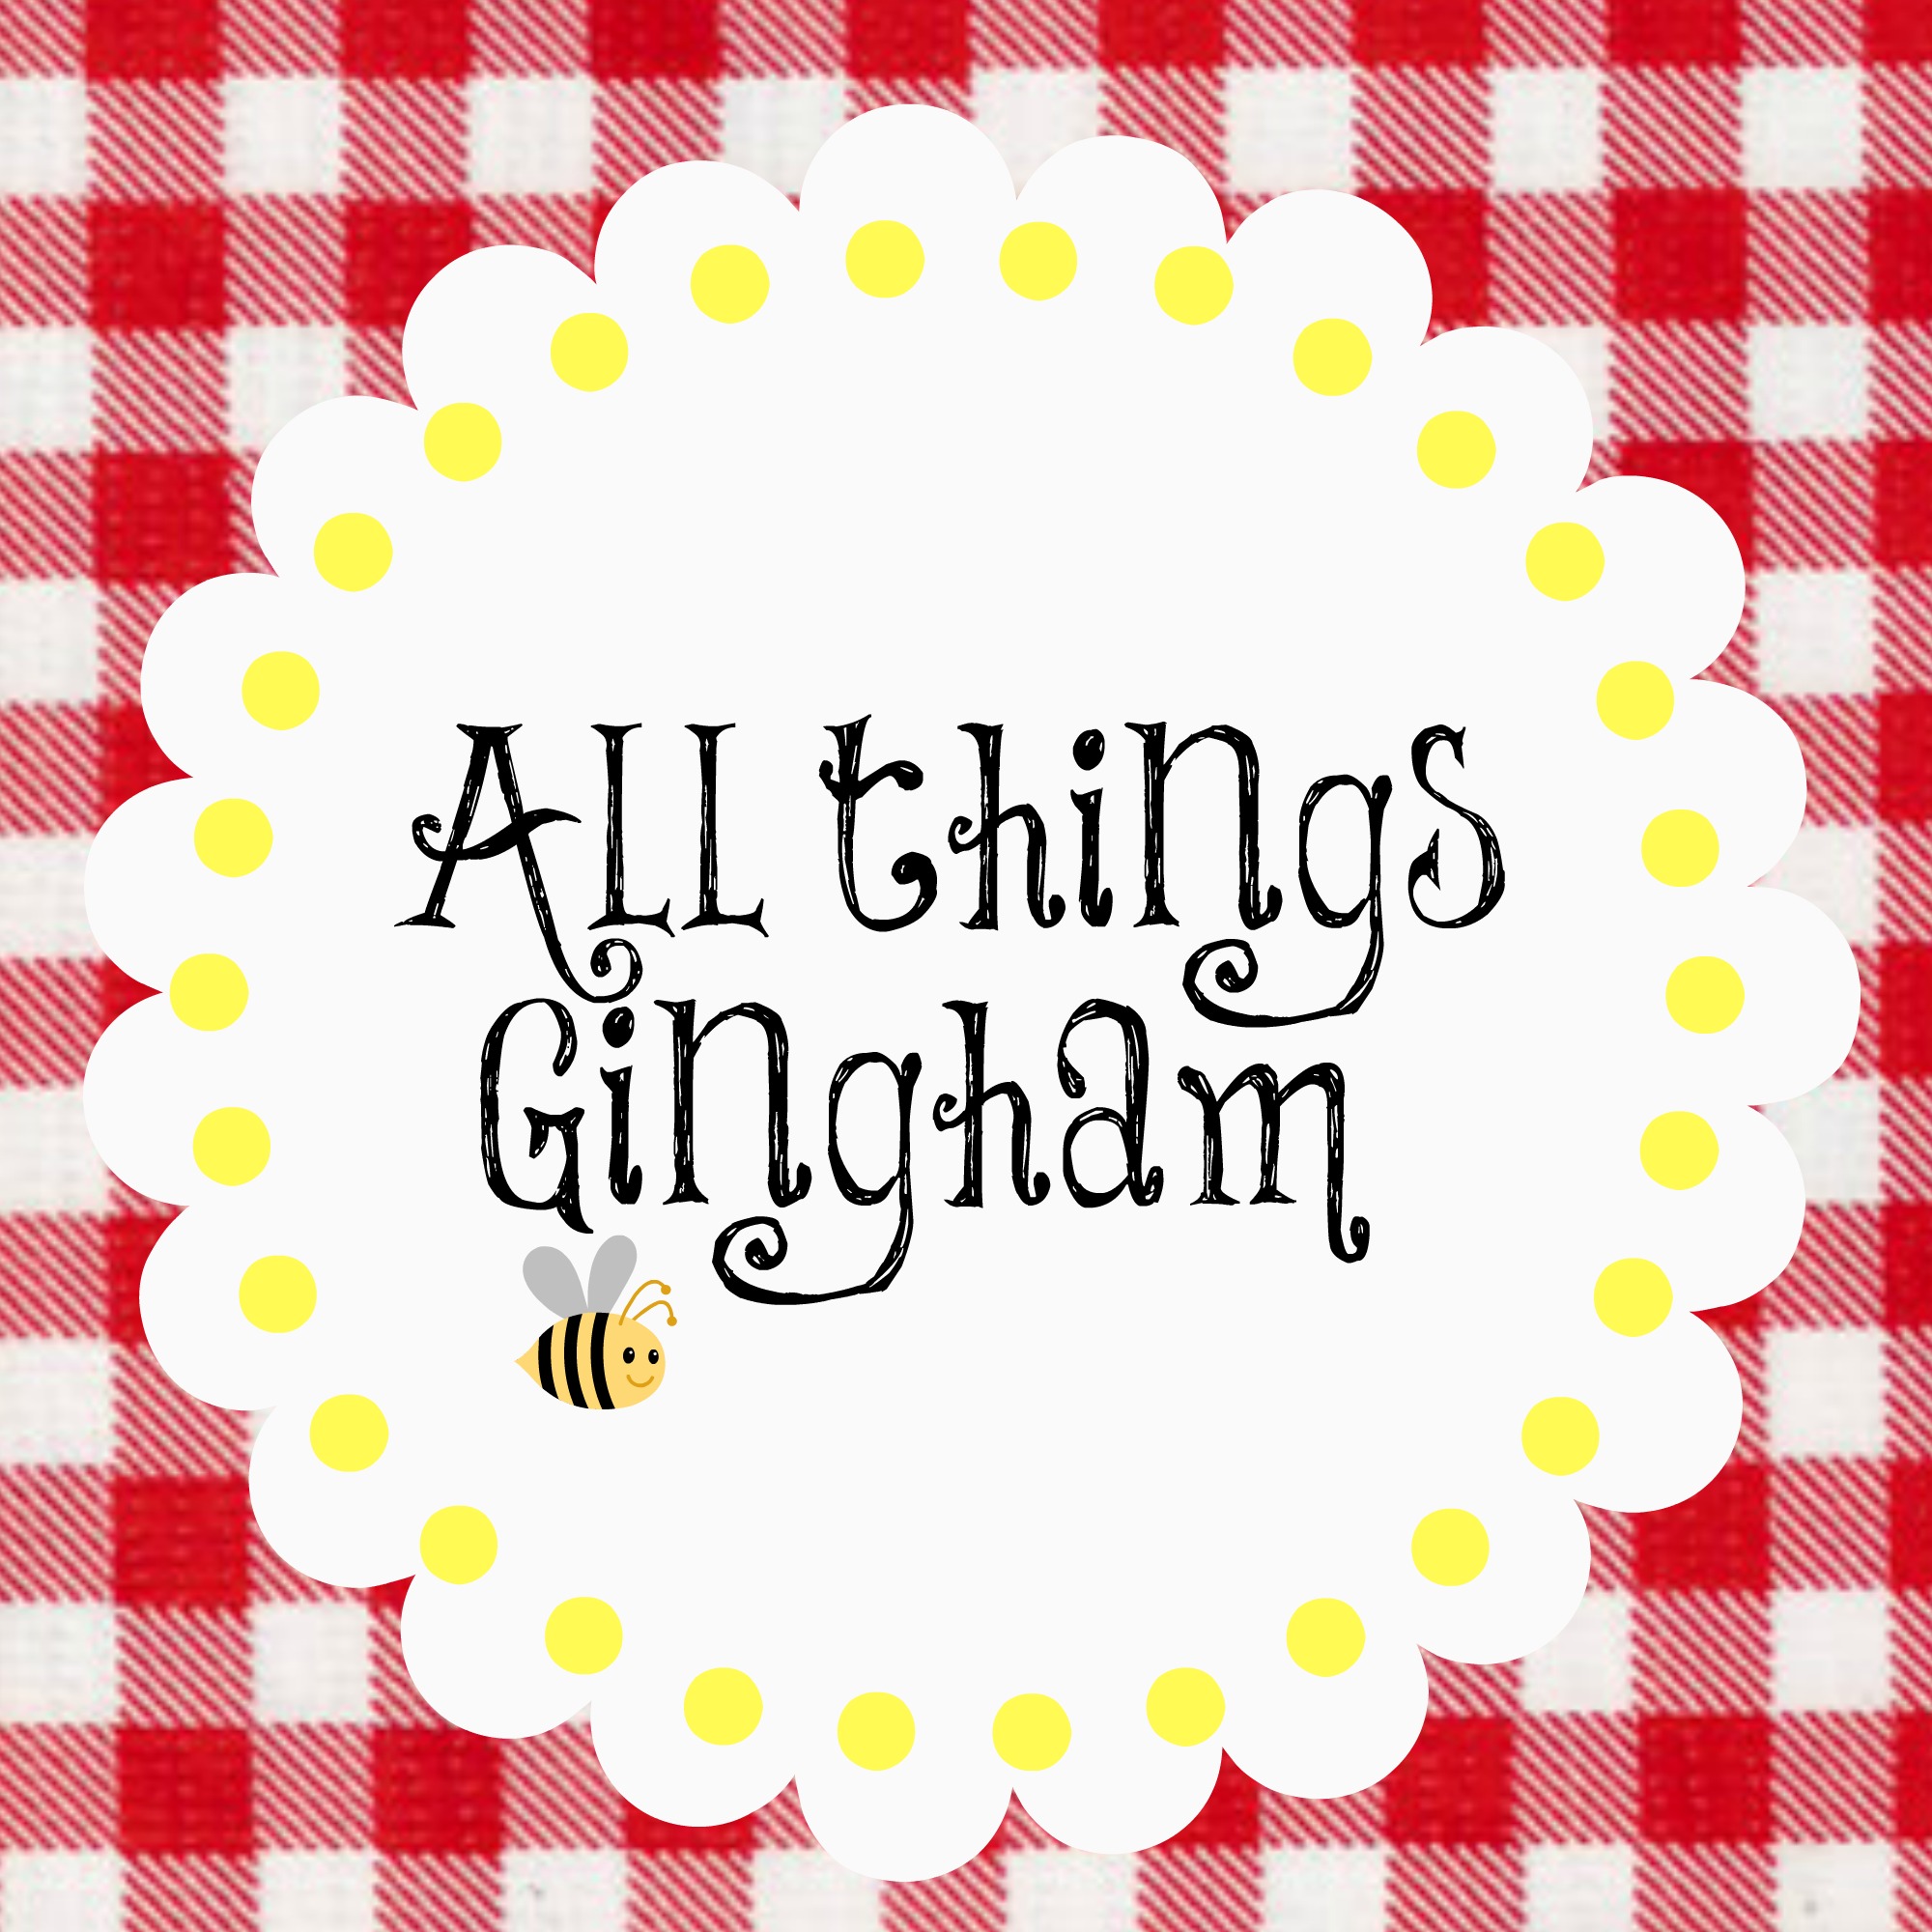 All things gingham